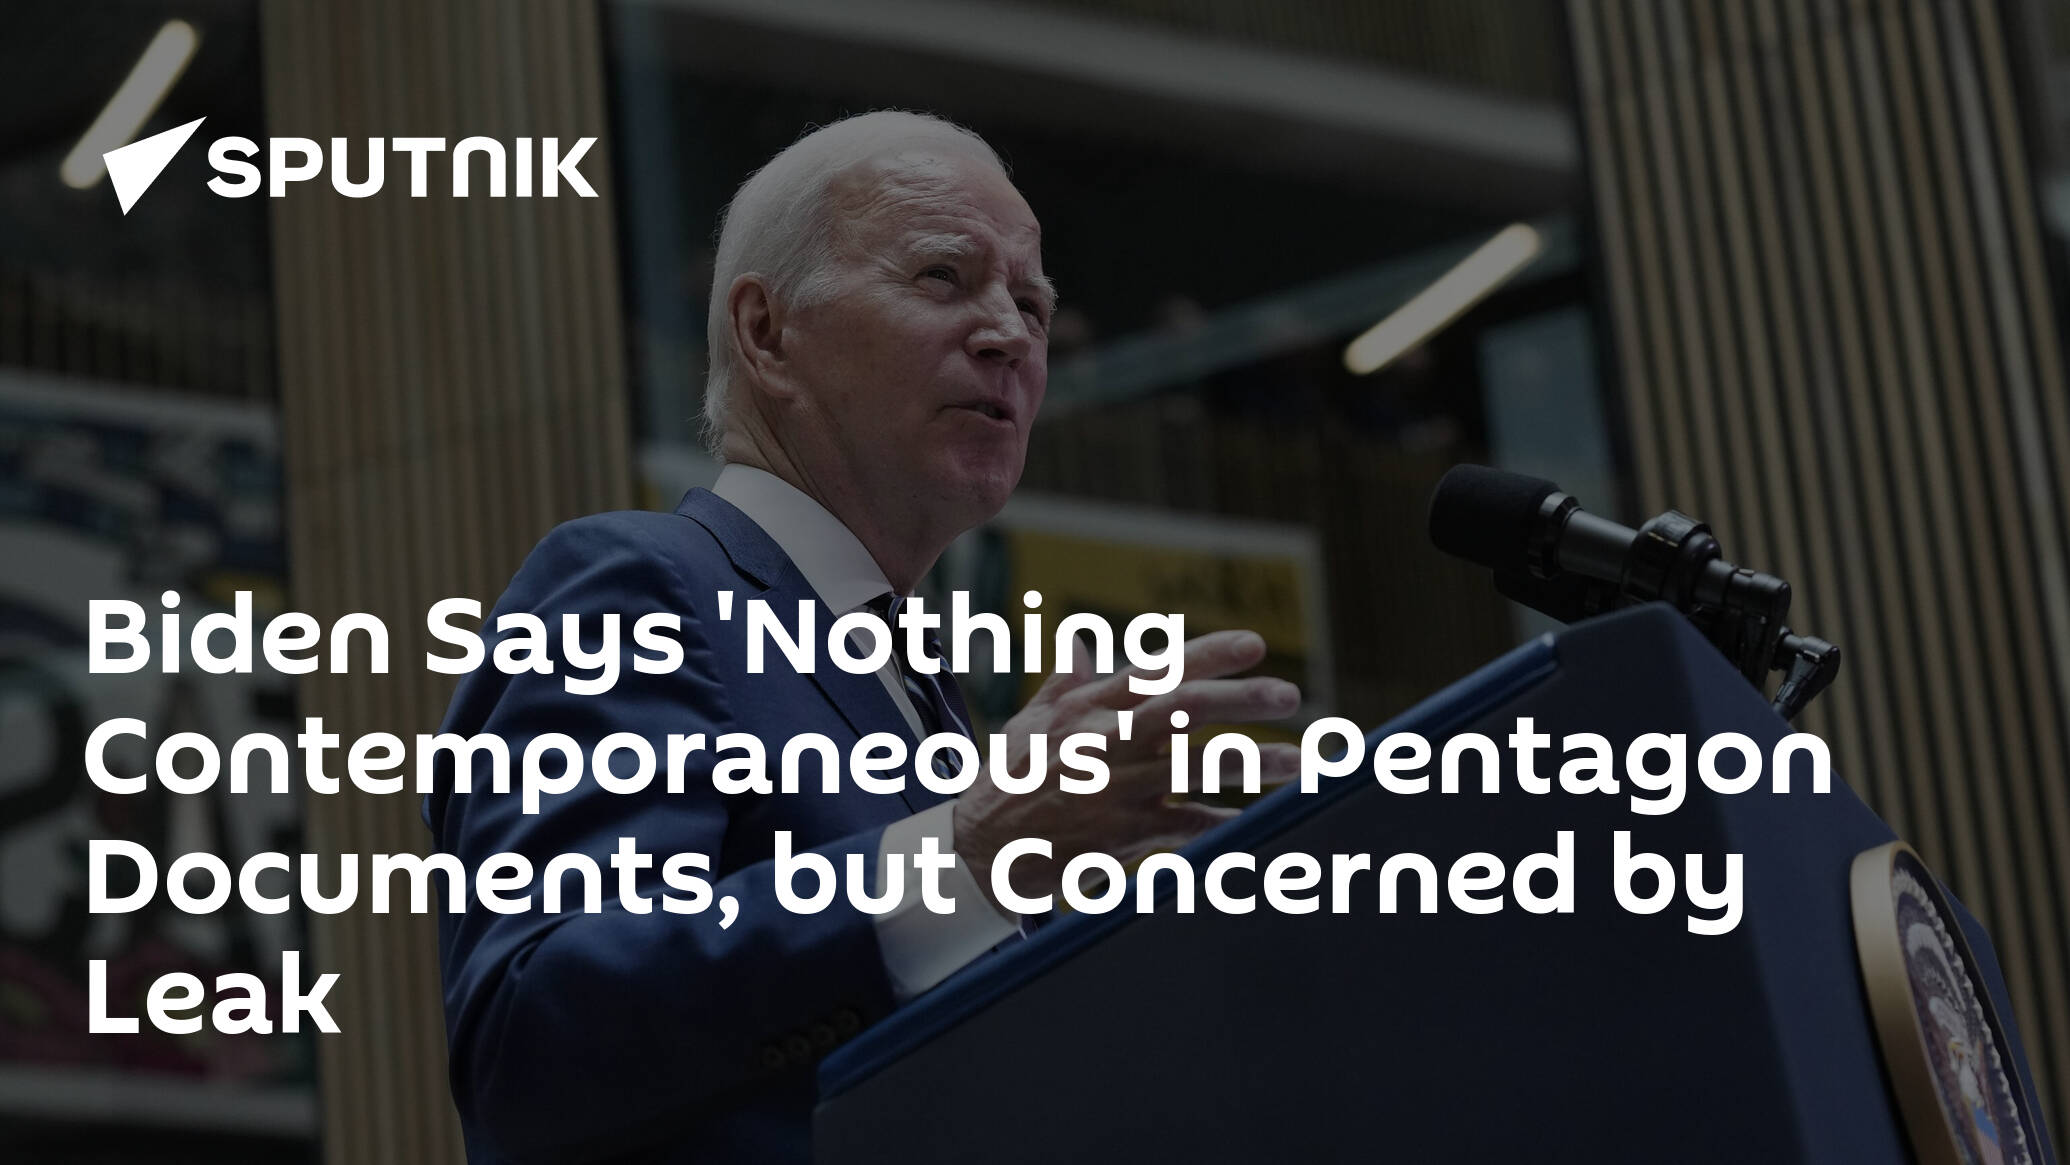 Biden Says 'Nothing Contemporaneous' in Pentagon Documents, but Concerned by Leak